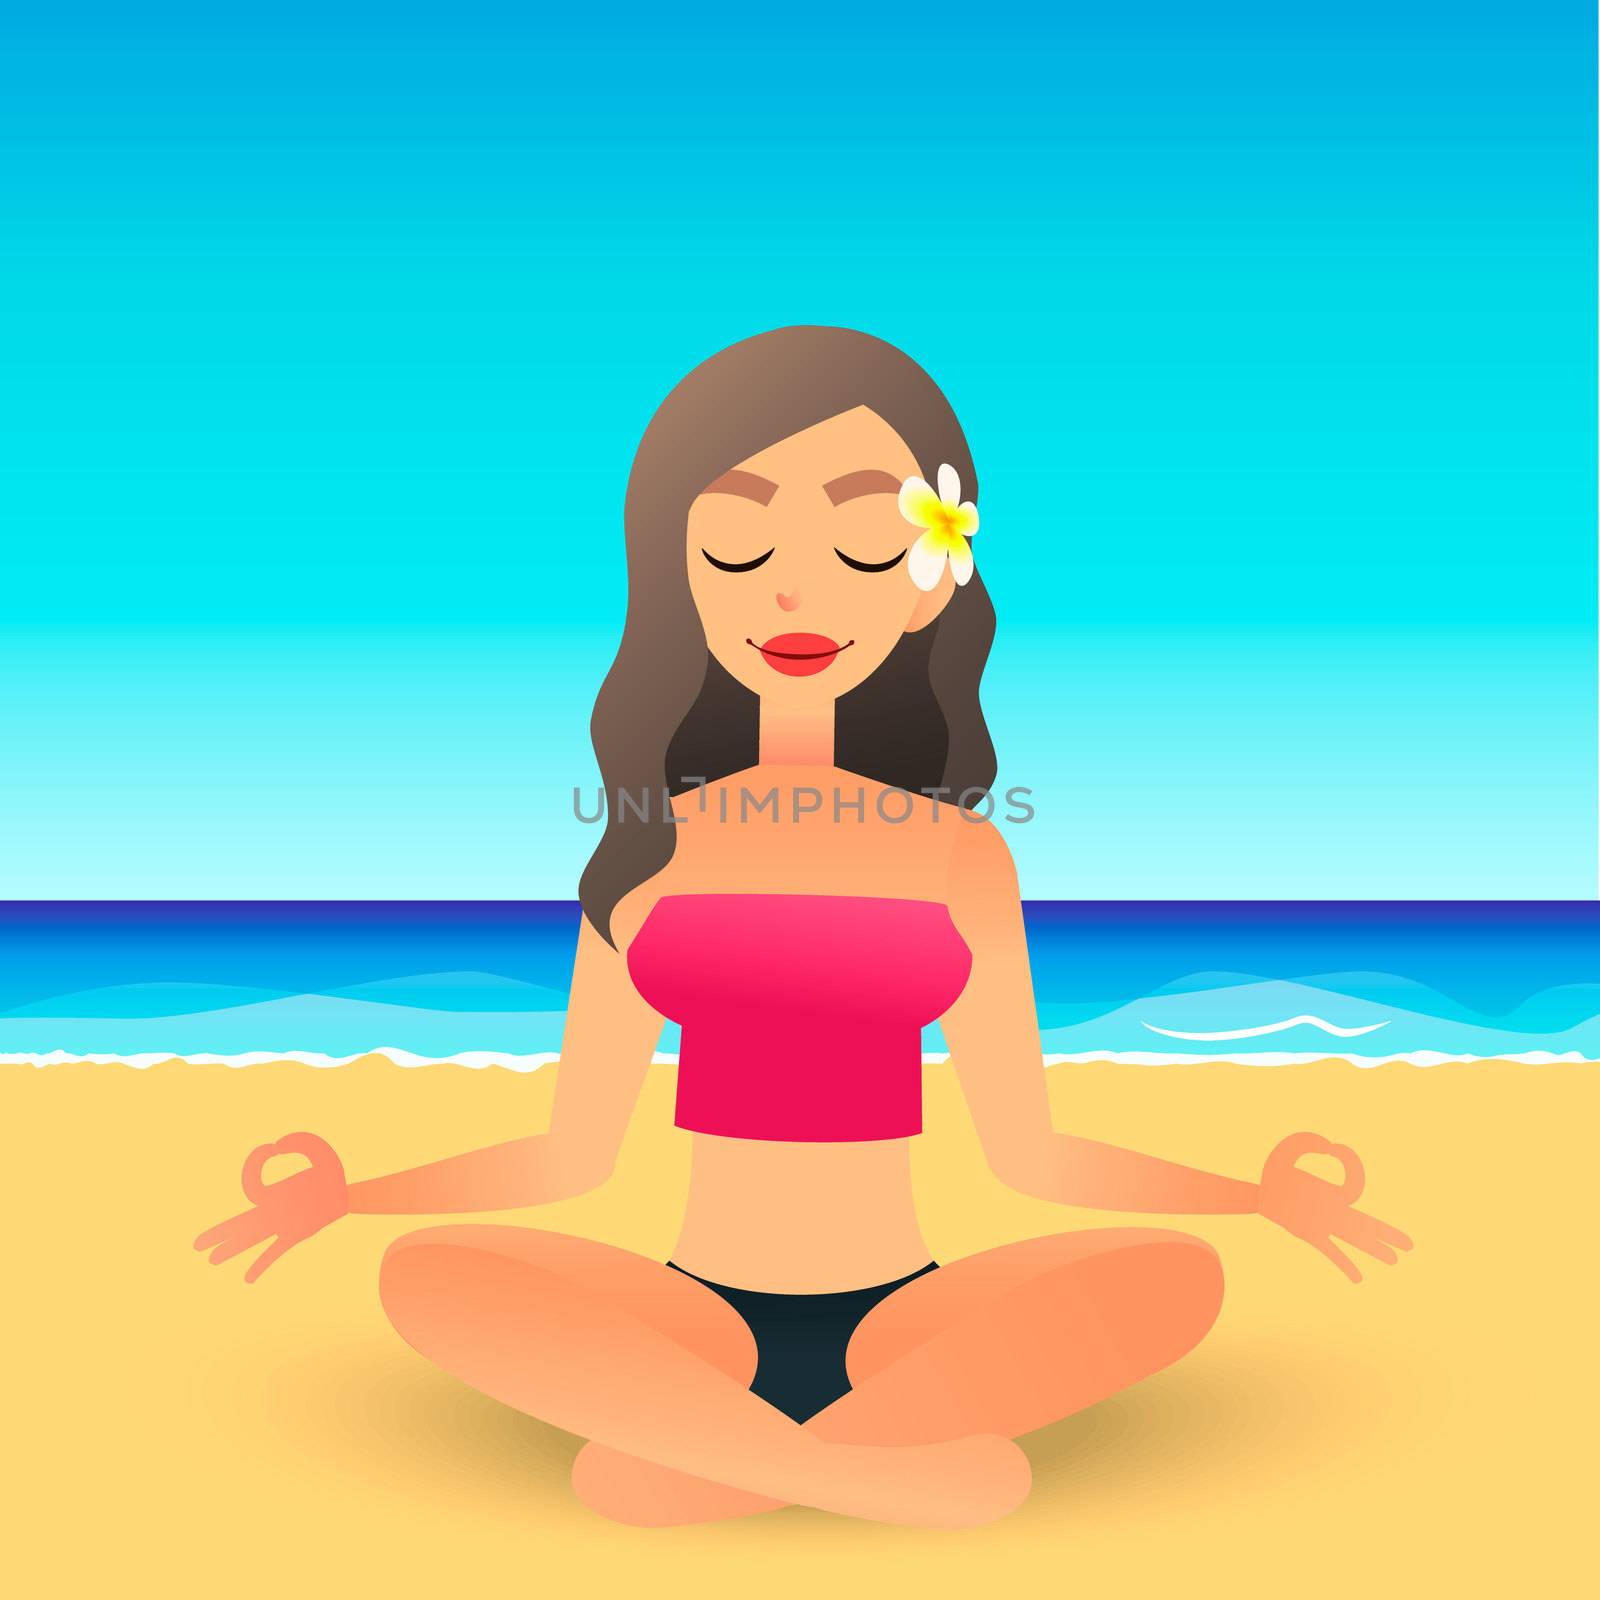 Cartoon young beautiful girl on beach practicing yoga. Flat women meditates and relaxes. Physical and spiritual therapy concept. Mind body spirit. Lady in lotus position